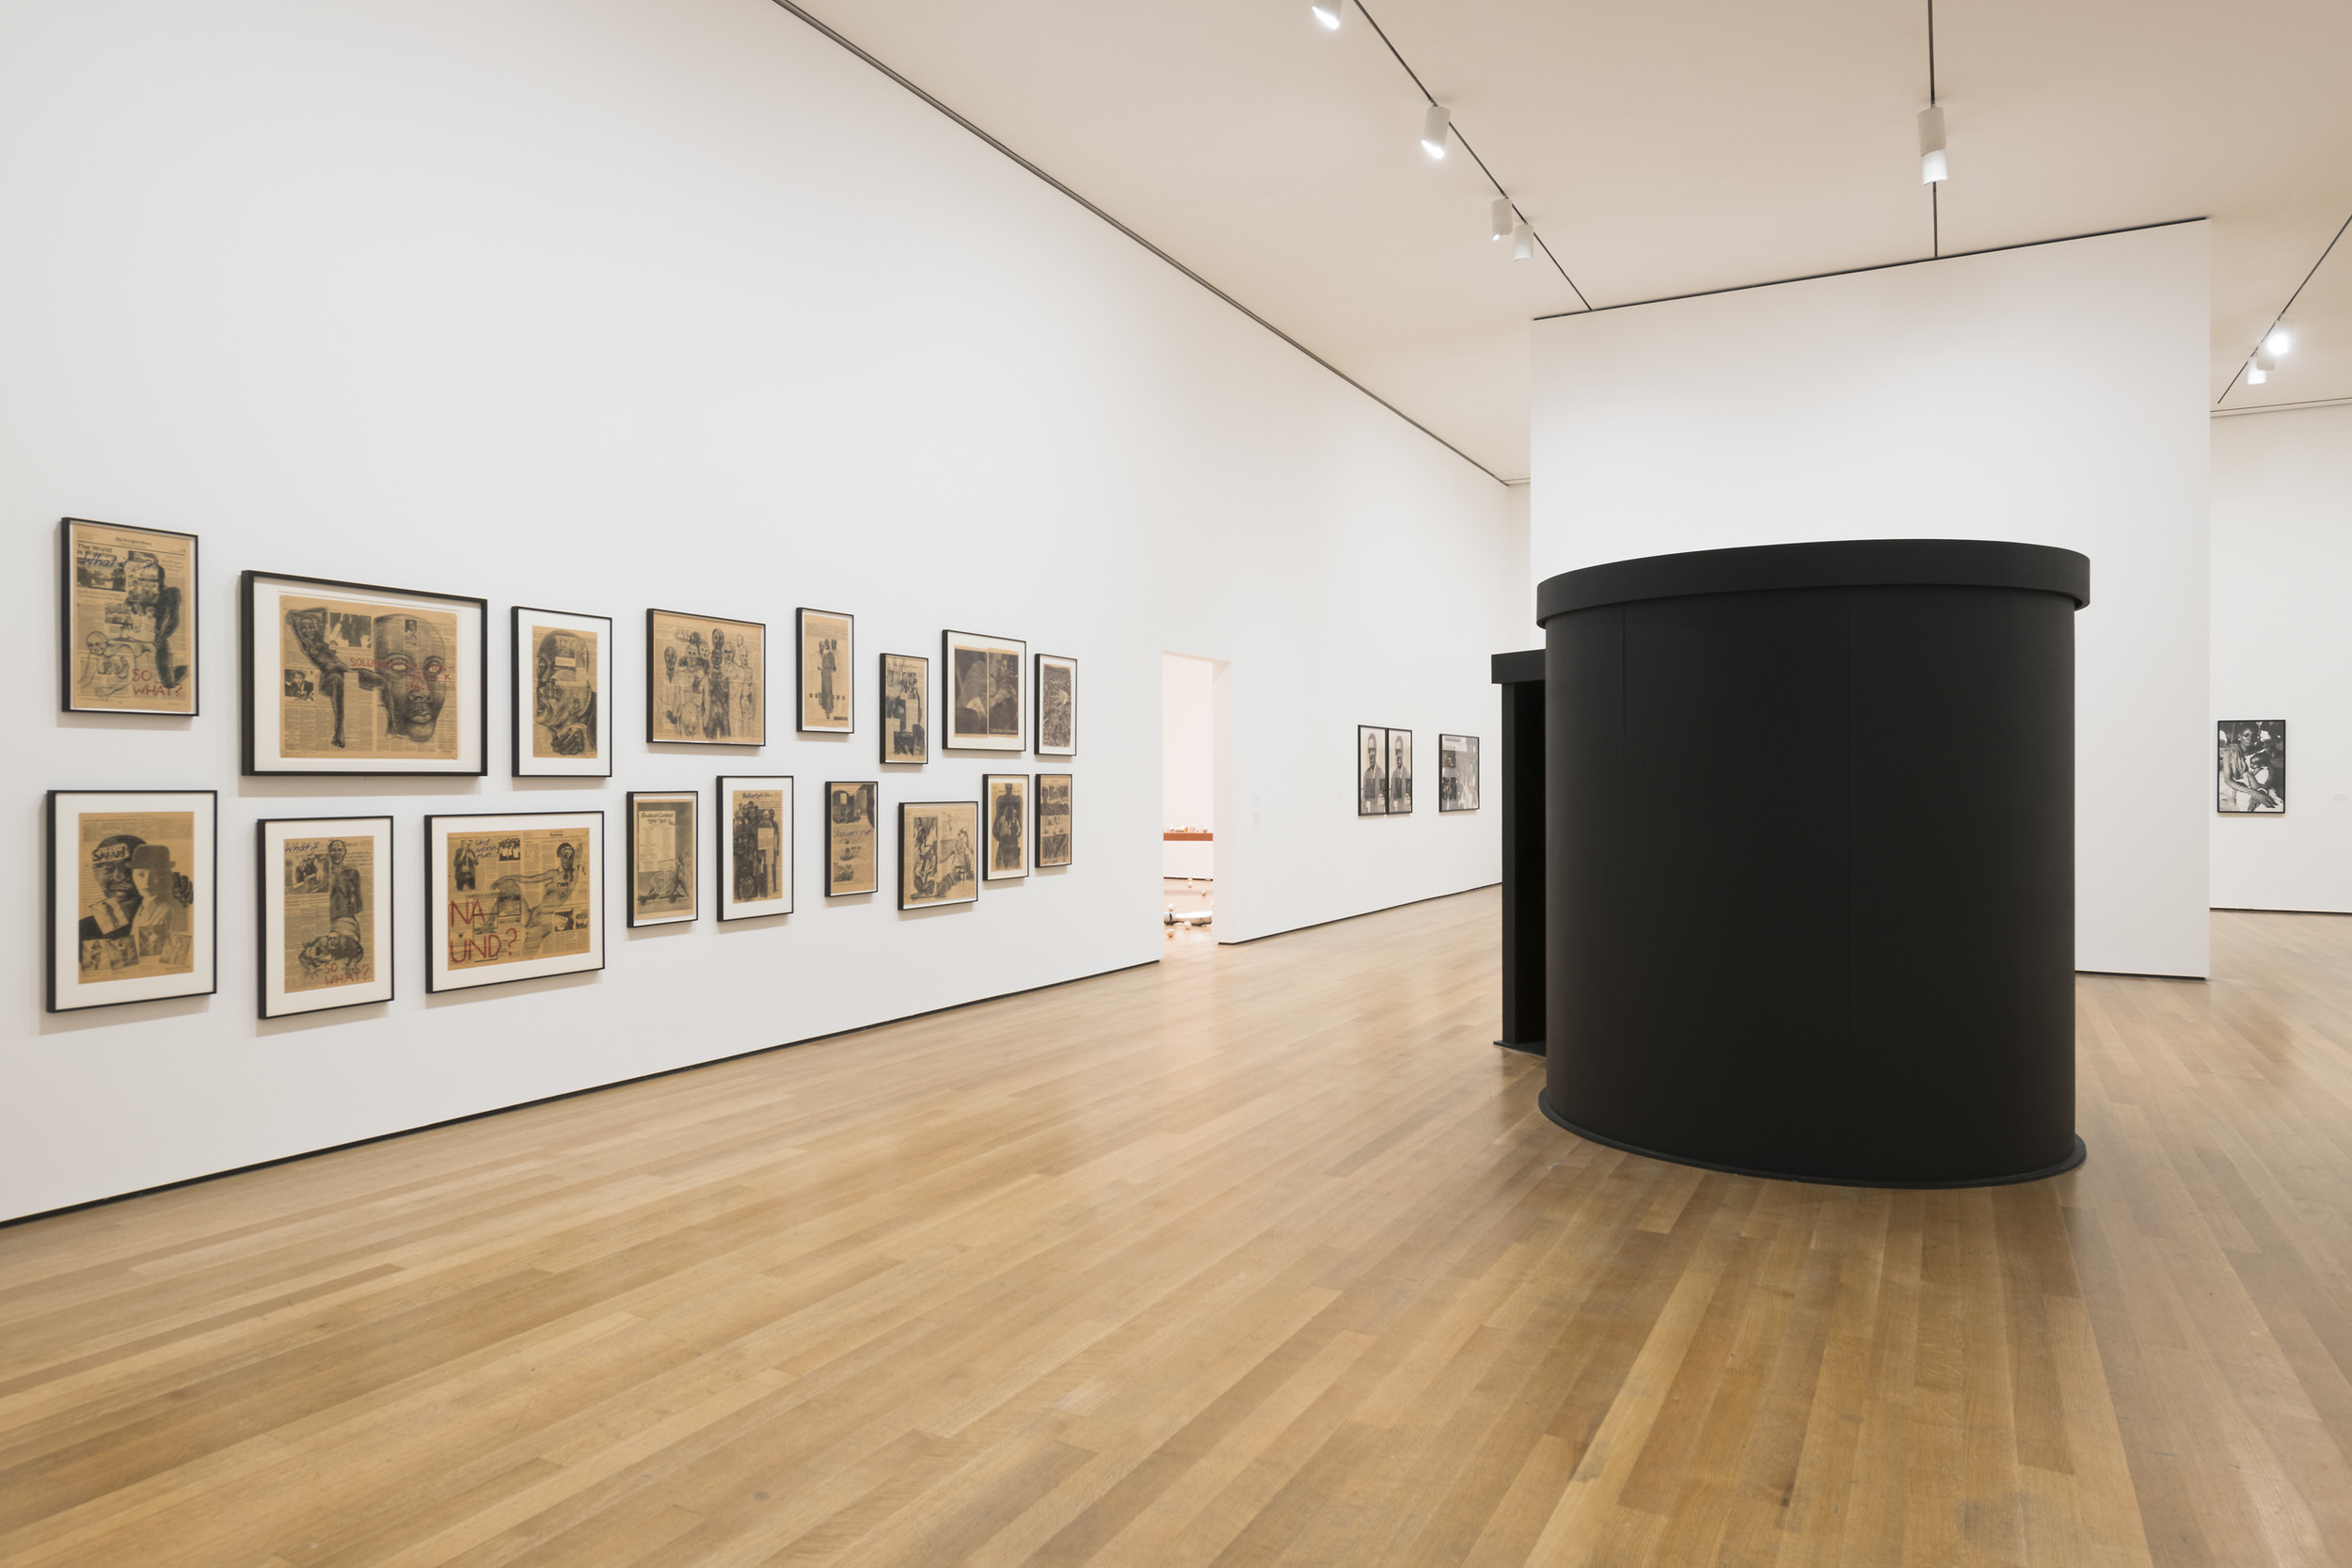 Adrian Piper at MoMA – Art Viewer